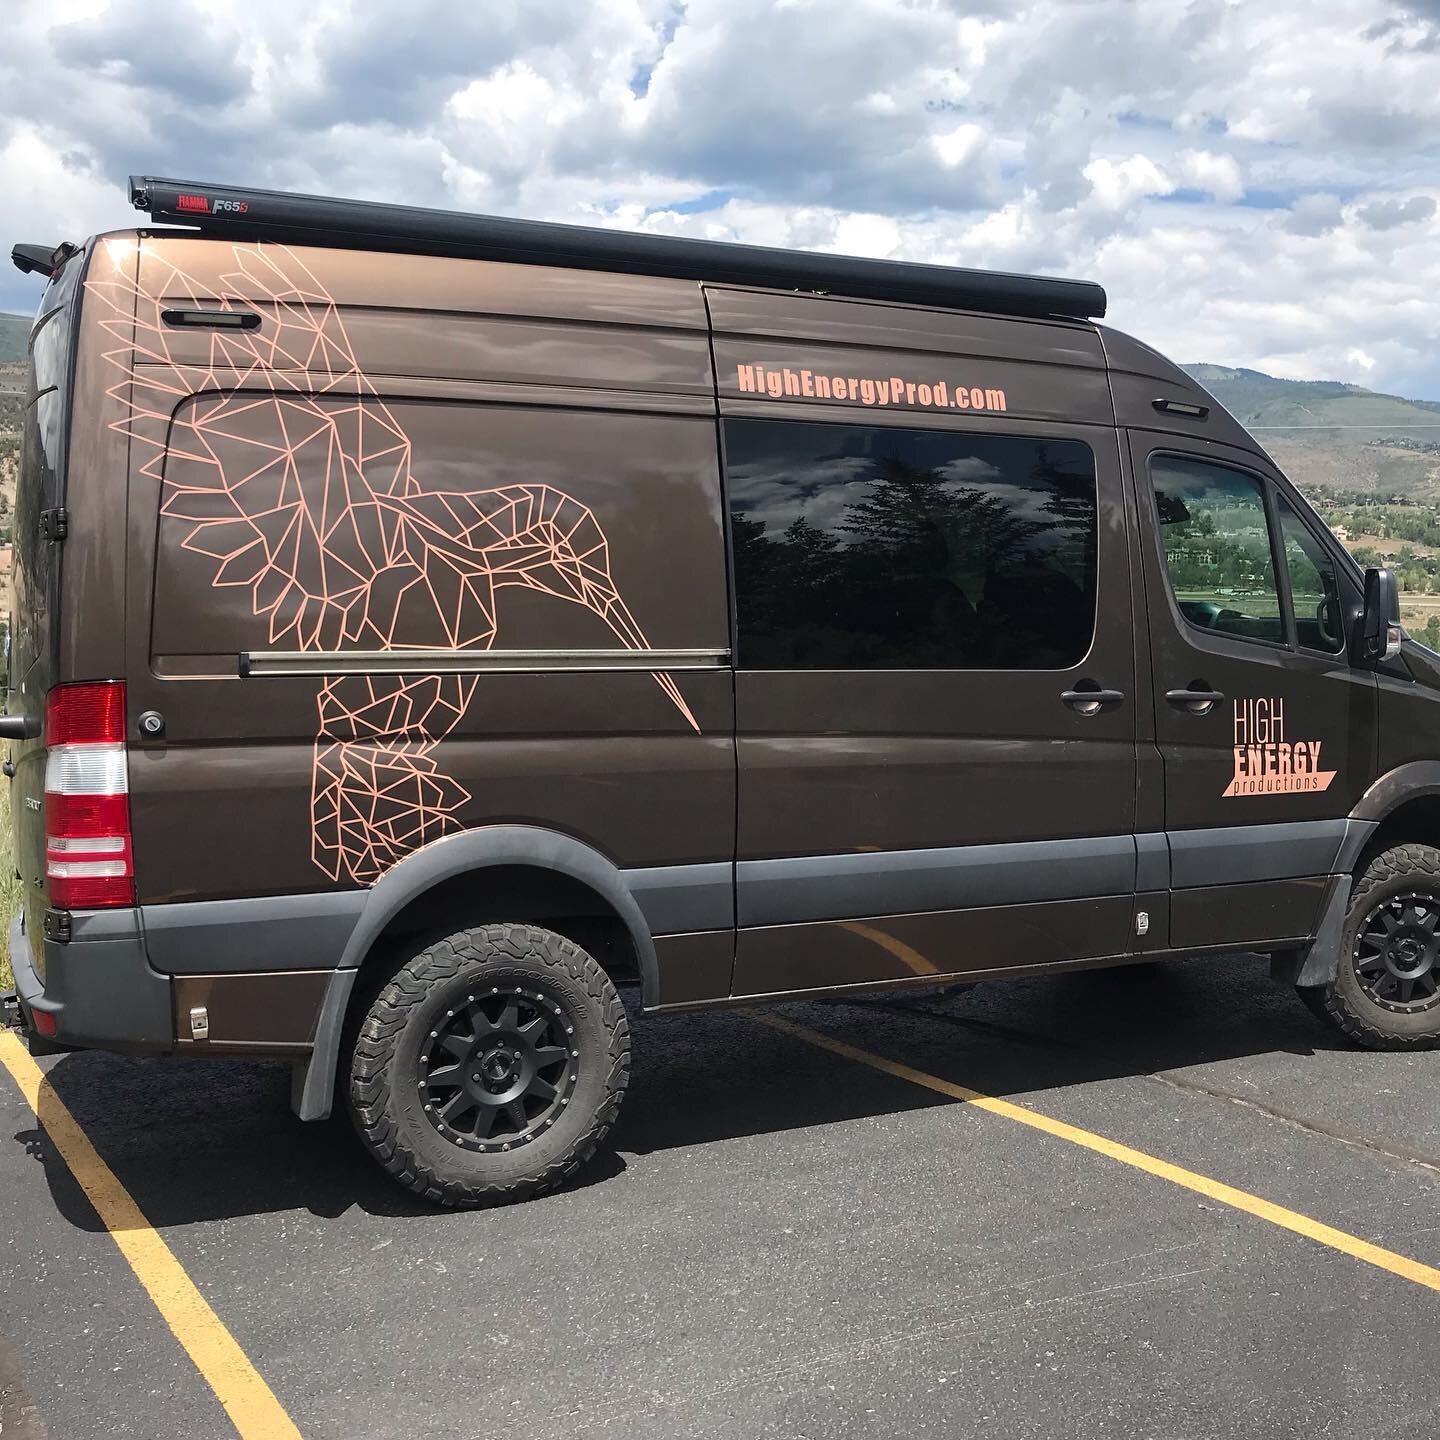 High Energy Productions needed branding for their new Sprinter van. We used a matte finish printed vinyl to achieve the subtle tone on tone look they wanted. Look for them down at the MLB Allstar events this weekend in Denver.